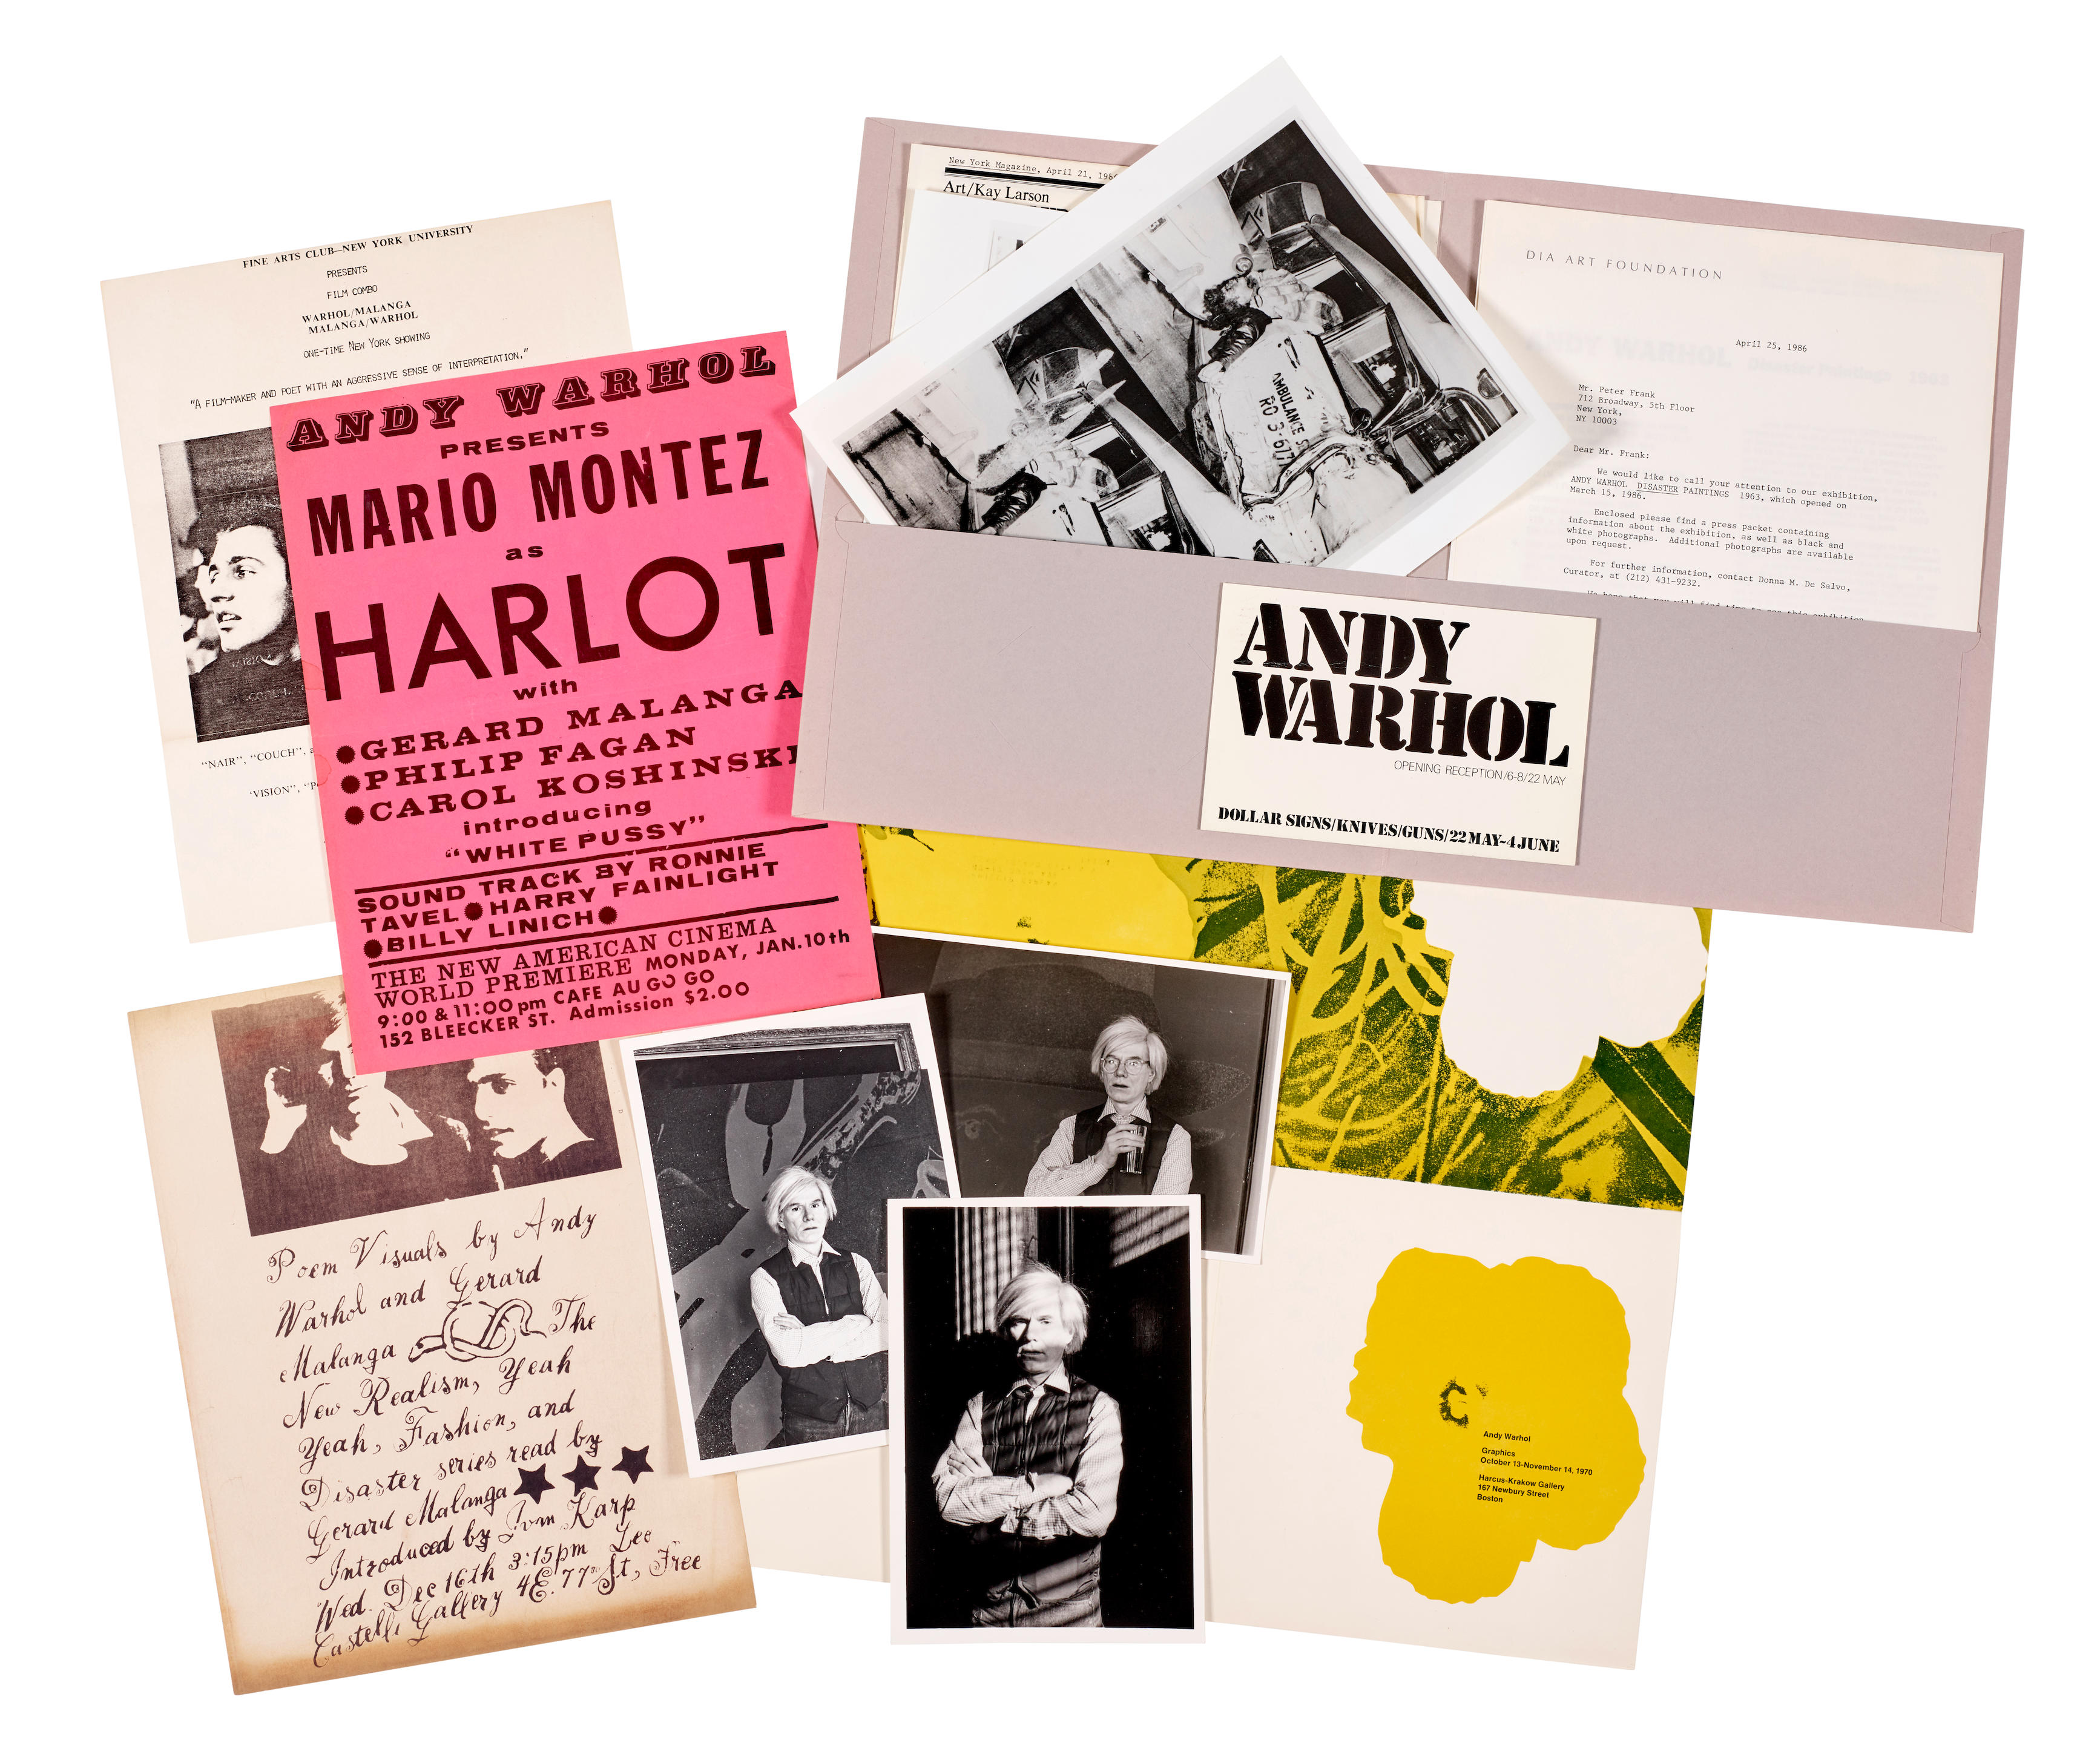 A COLLECTION OF ANDY WARHOL INVITATIONS, POSTERS, AND EPHEMERA.